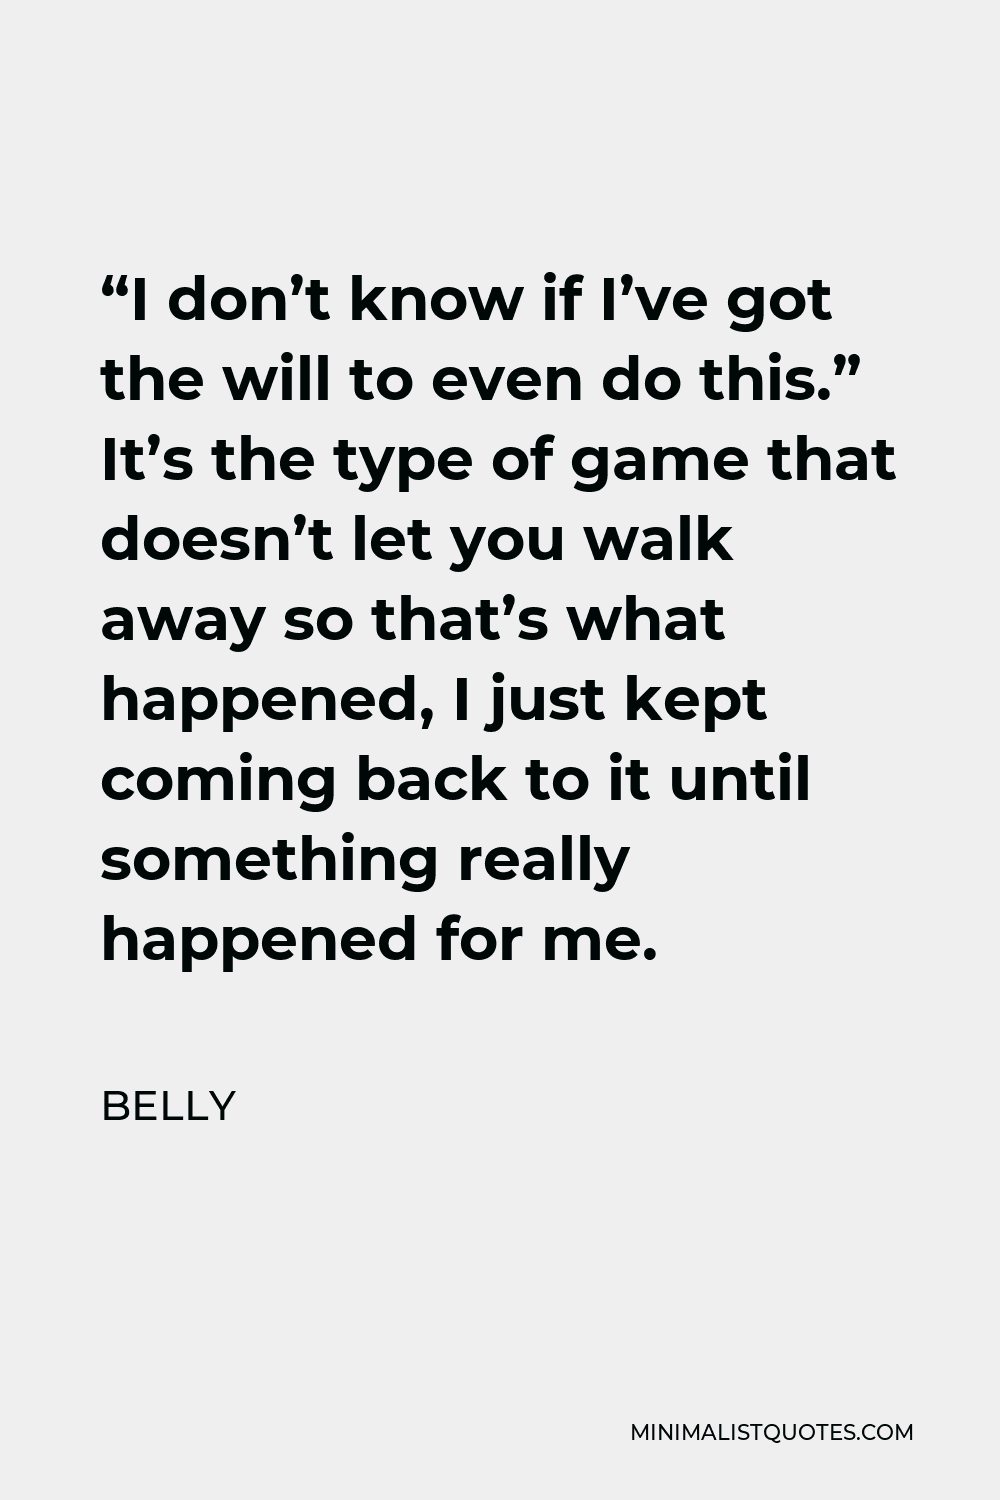 Belly Quote - “I don’t know if I’ve got the will to even do this.” It’s the type of game that doesn’t let you walk away so that’s what happened, I just kept coming back to it until something really happened for me.